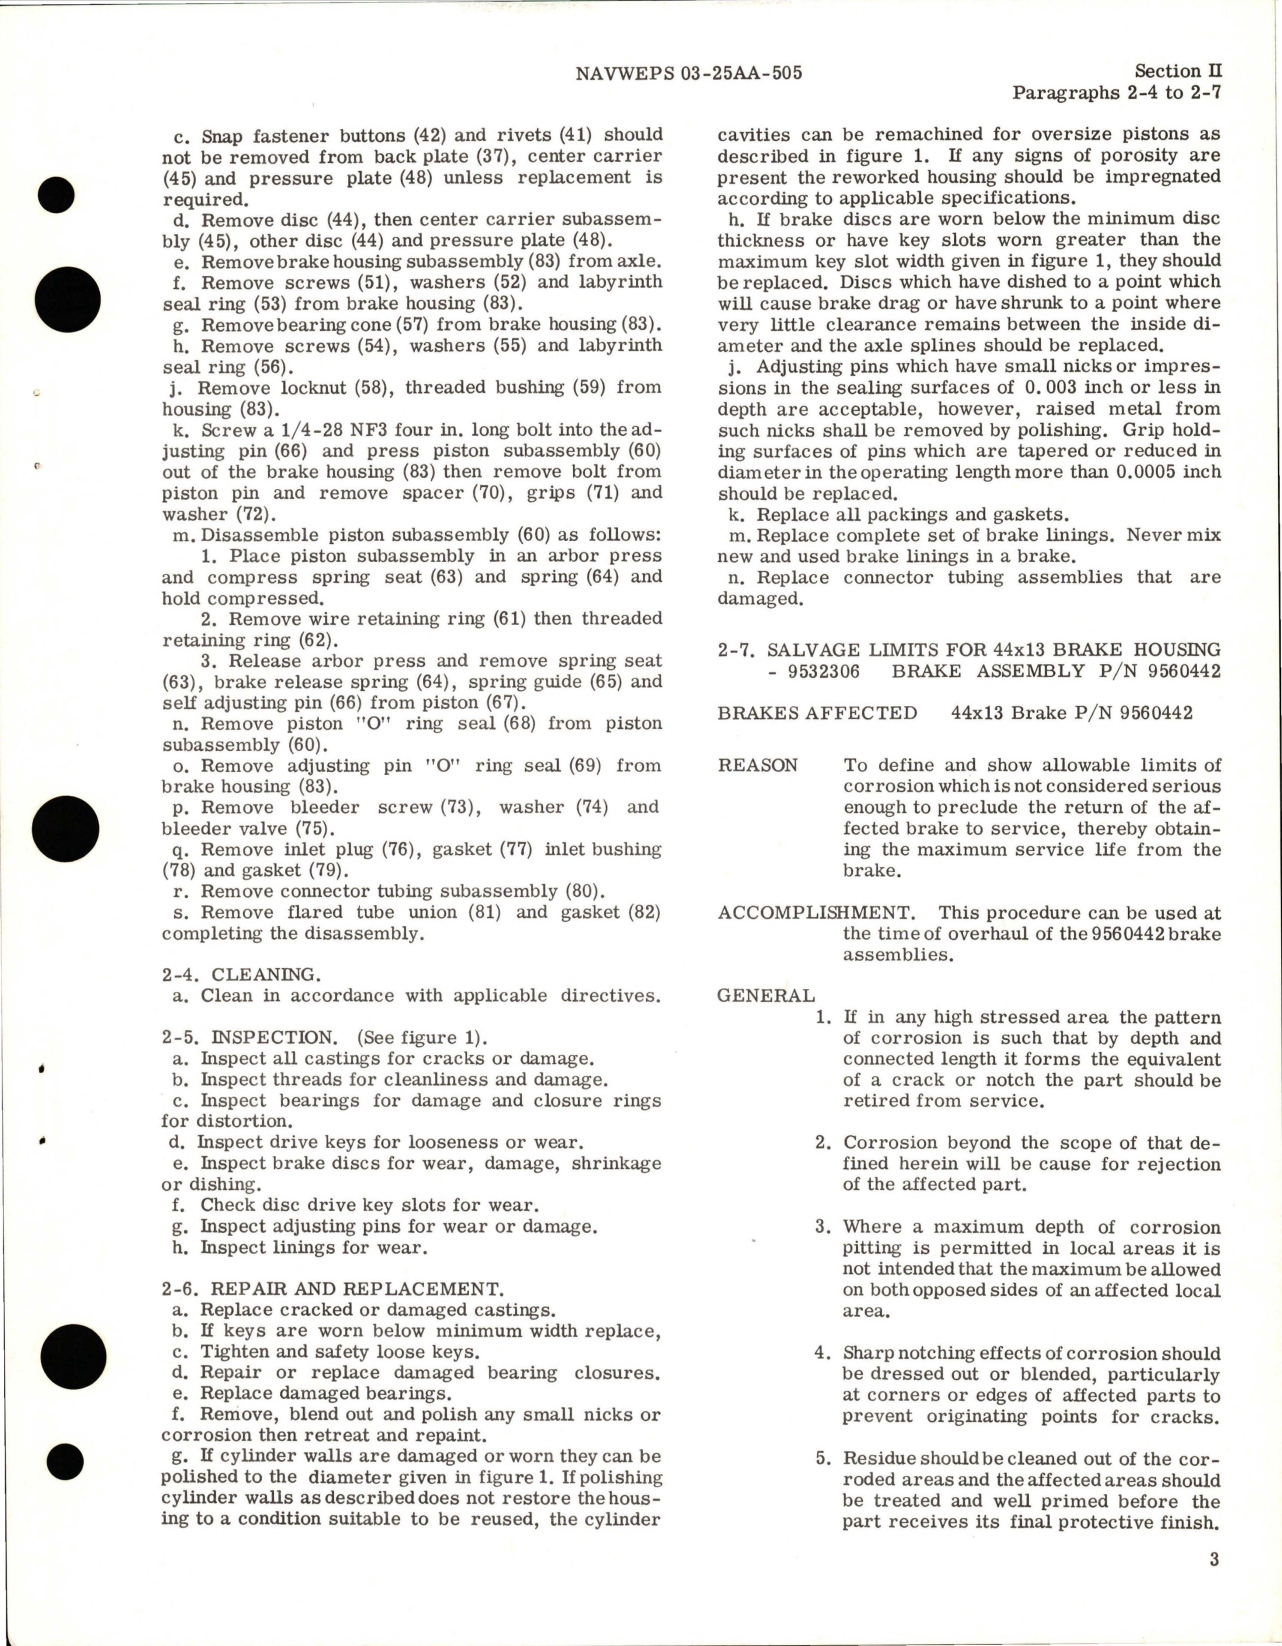 Sample page 5 from AirCorps Library document: Overhaul Instructions with Parts Breakdown for Internal Brake and Landing Gear Brake Assembly 9560442 and Wheel Assembly 9540978 